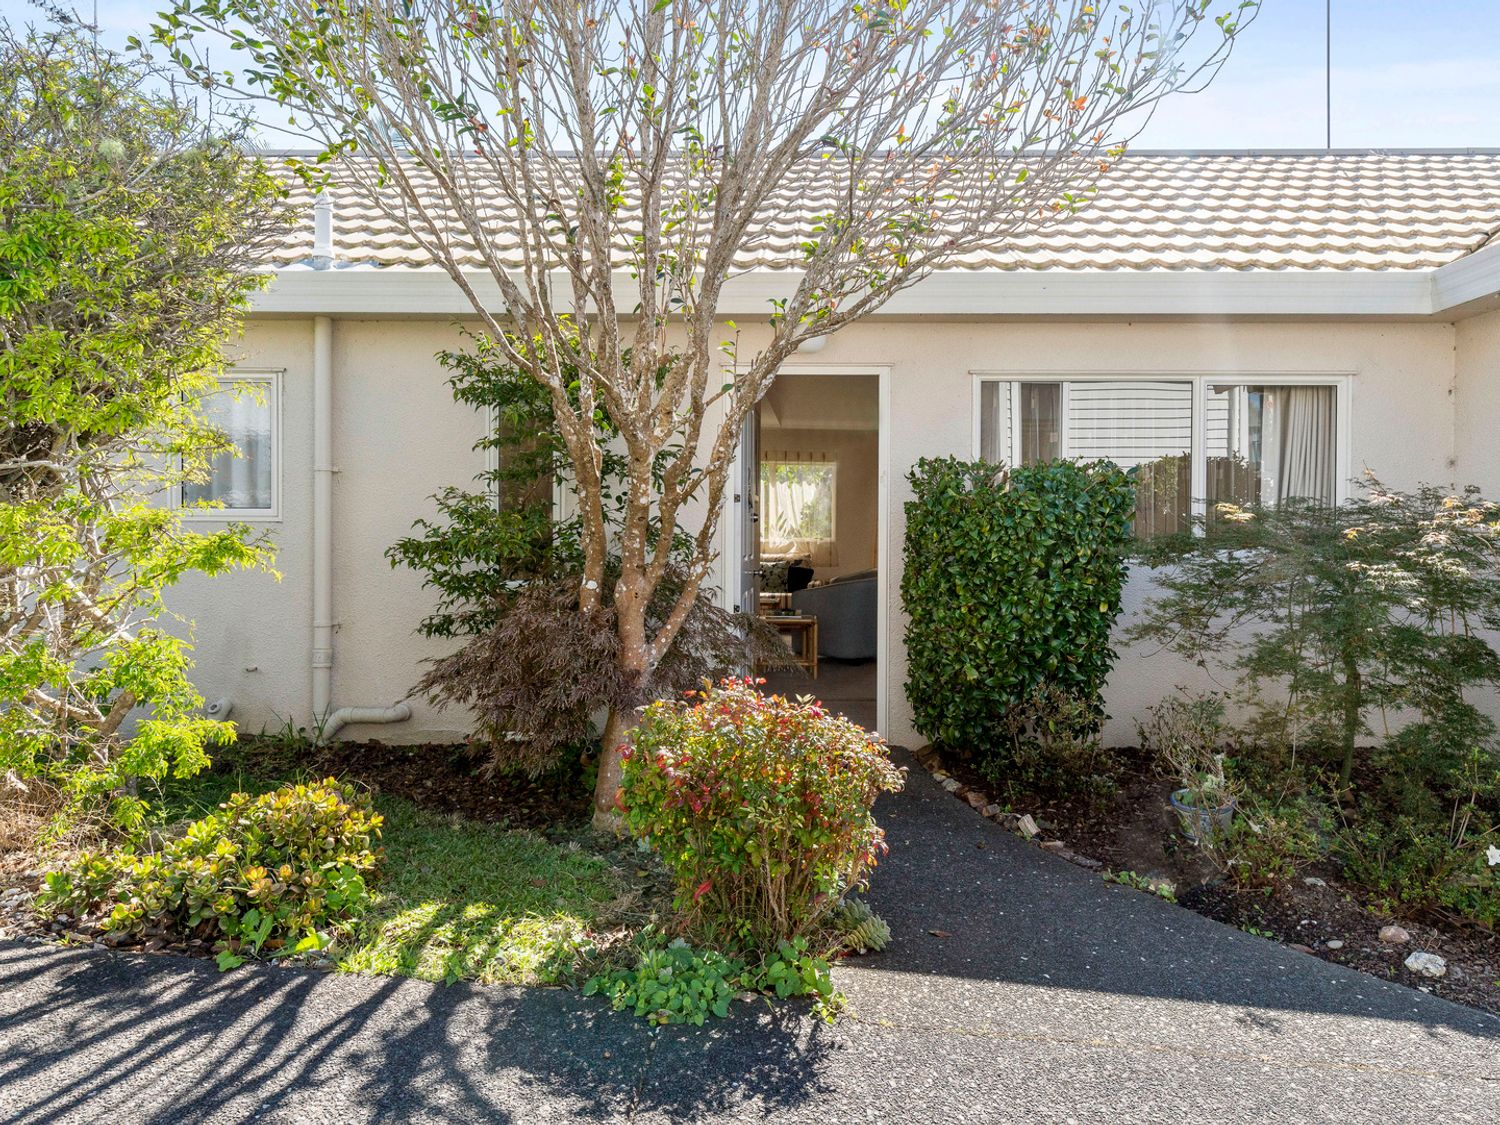 Little Manly Cottage - Manly Holiday Home -  - 1132575 - photo 1